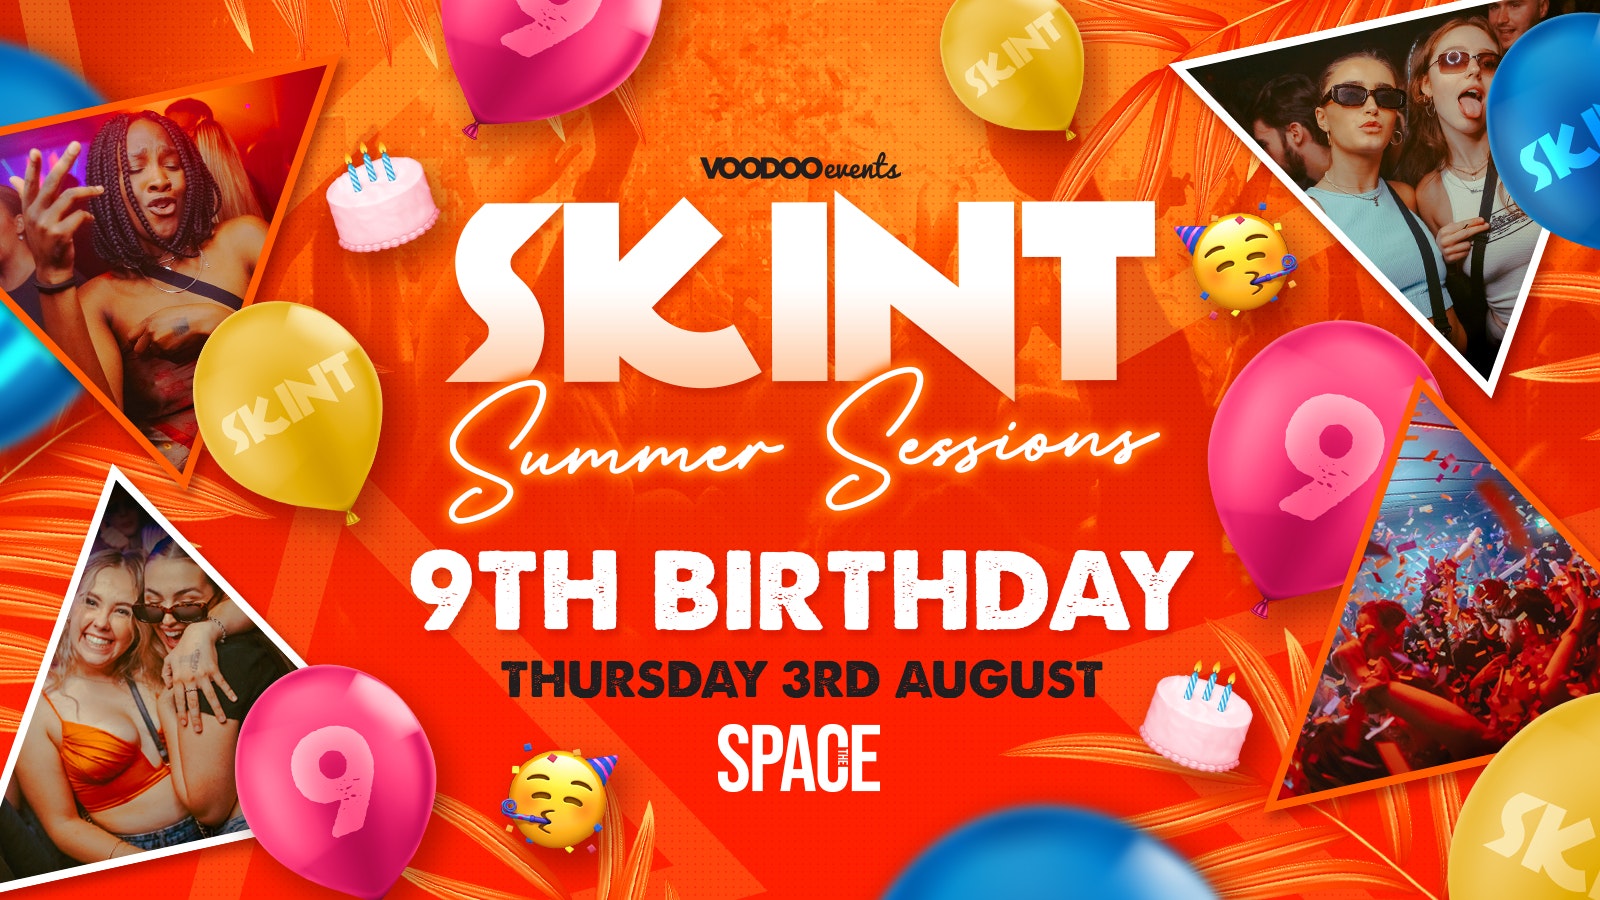 Skint Thursdays at Space – 9th BIRTHDAY – 3rd August